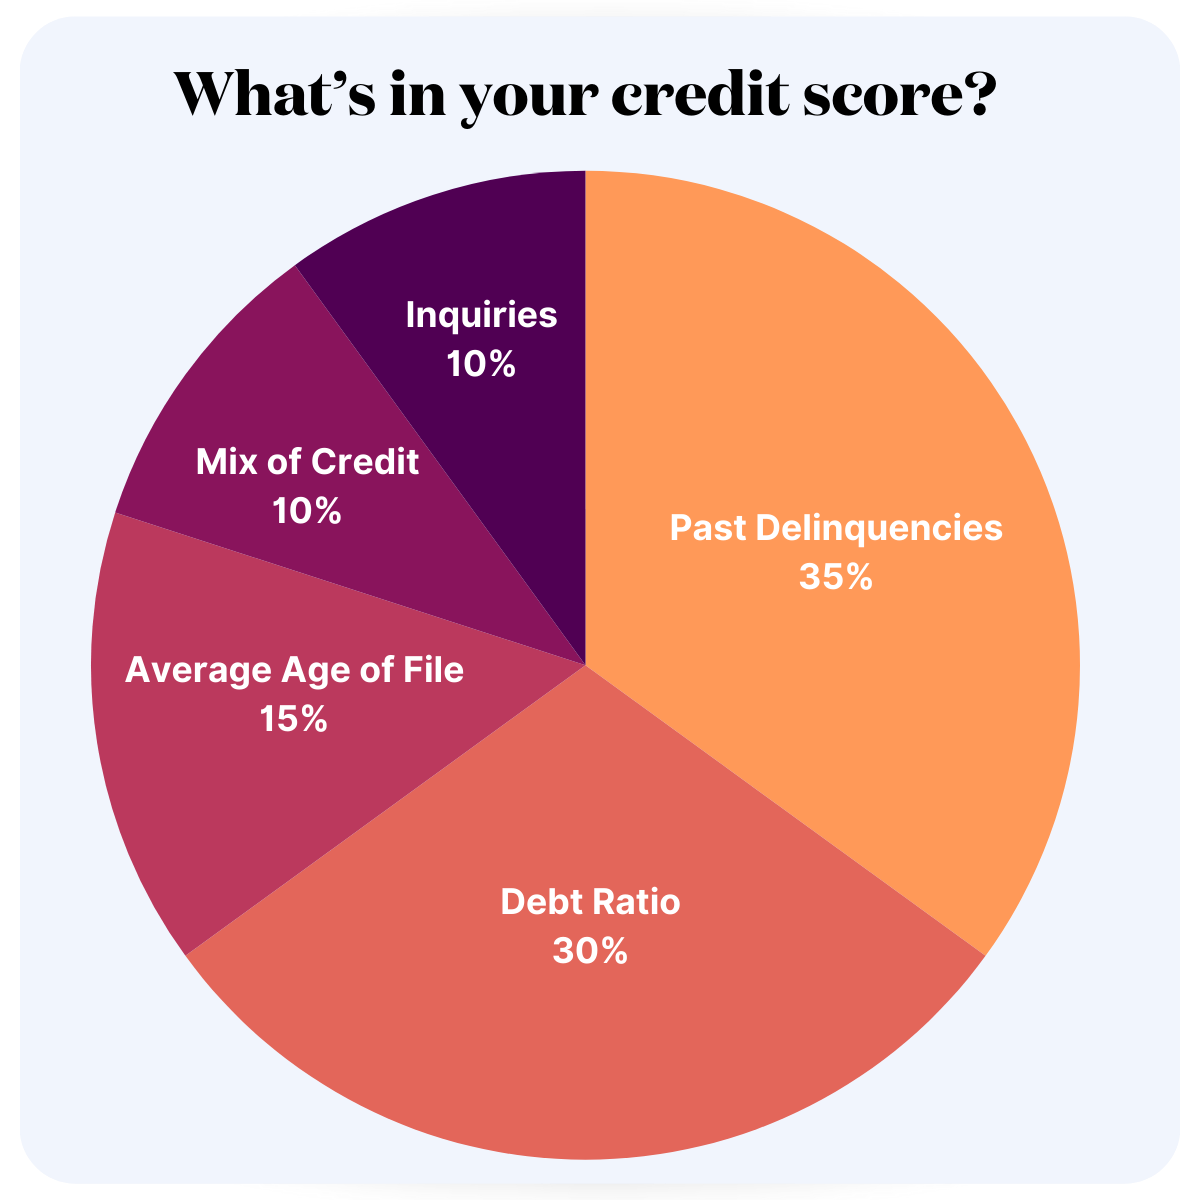 CredEvolv Credit Score Pie Chart - What’s in your credit score